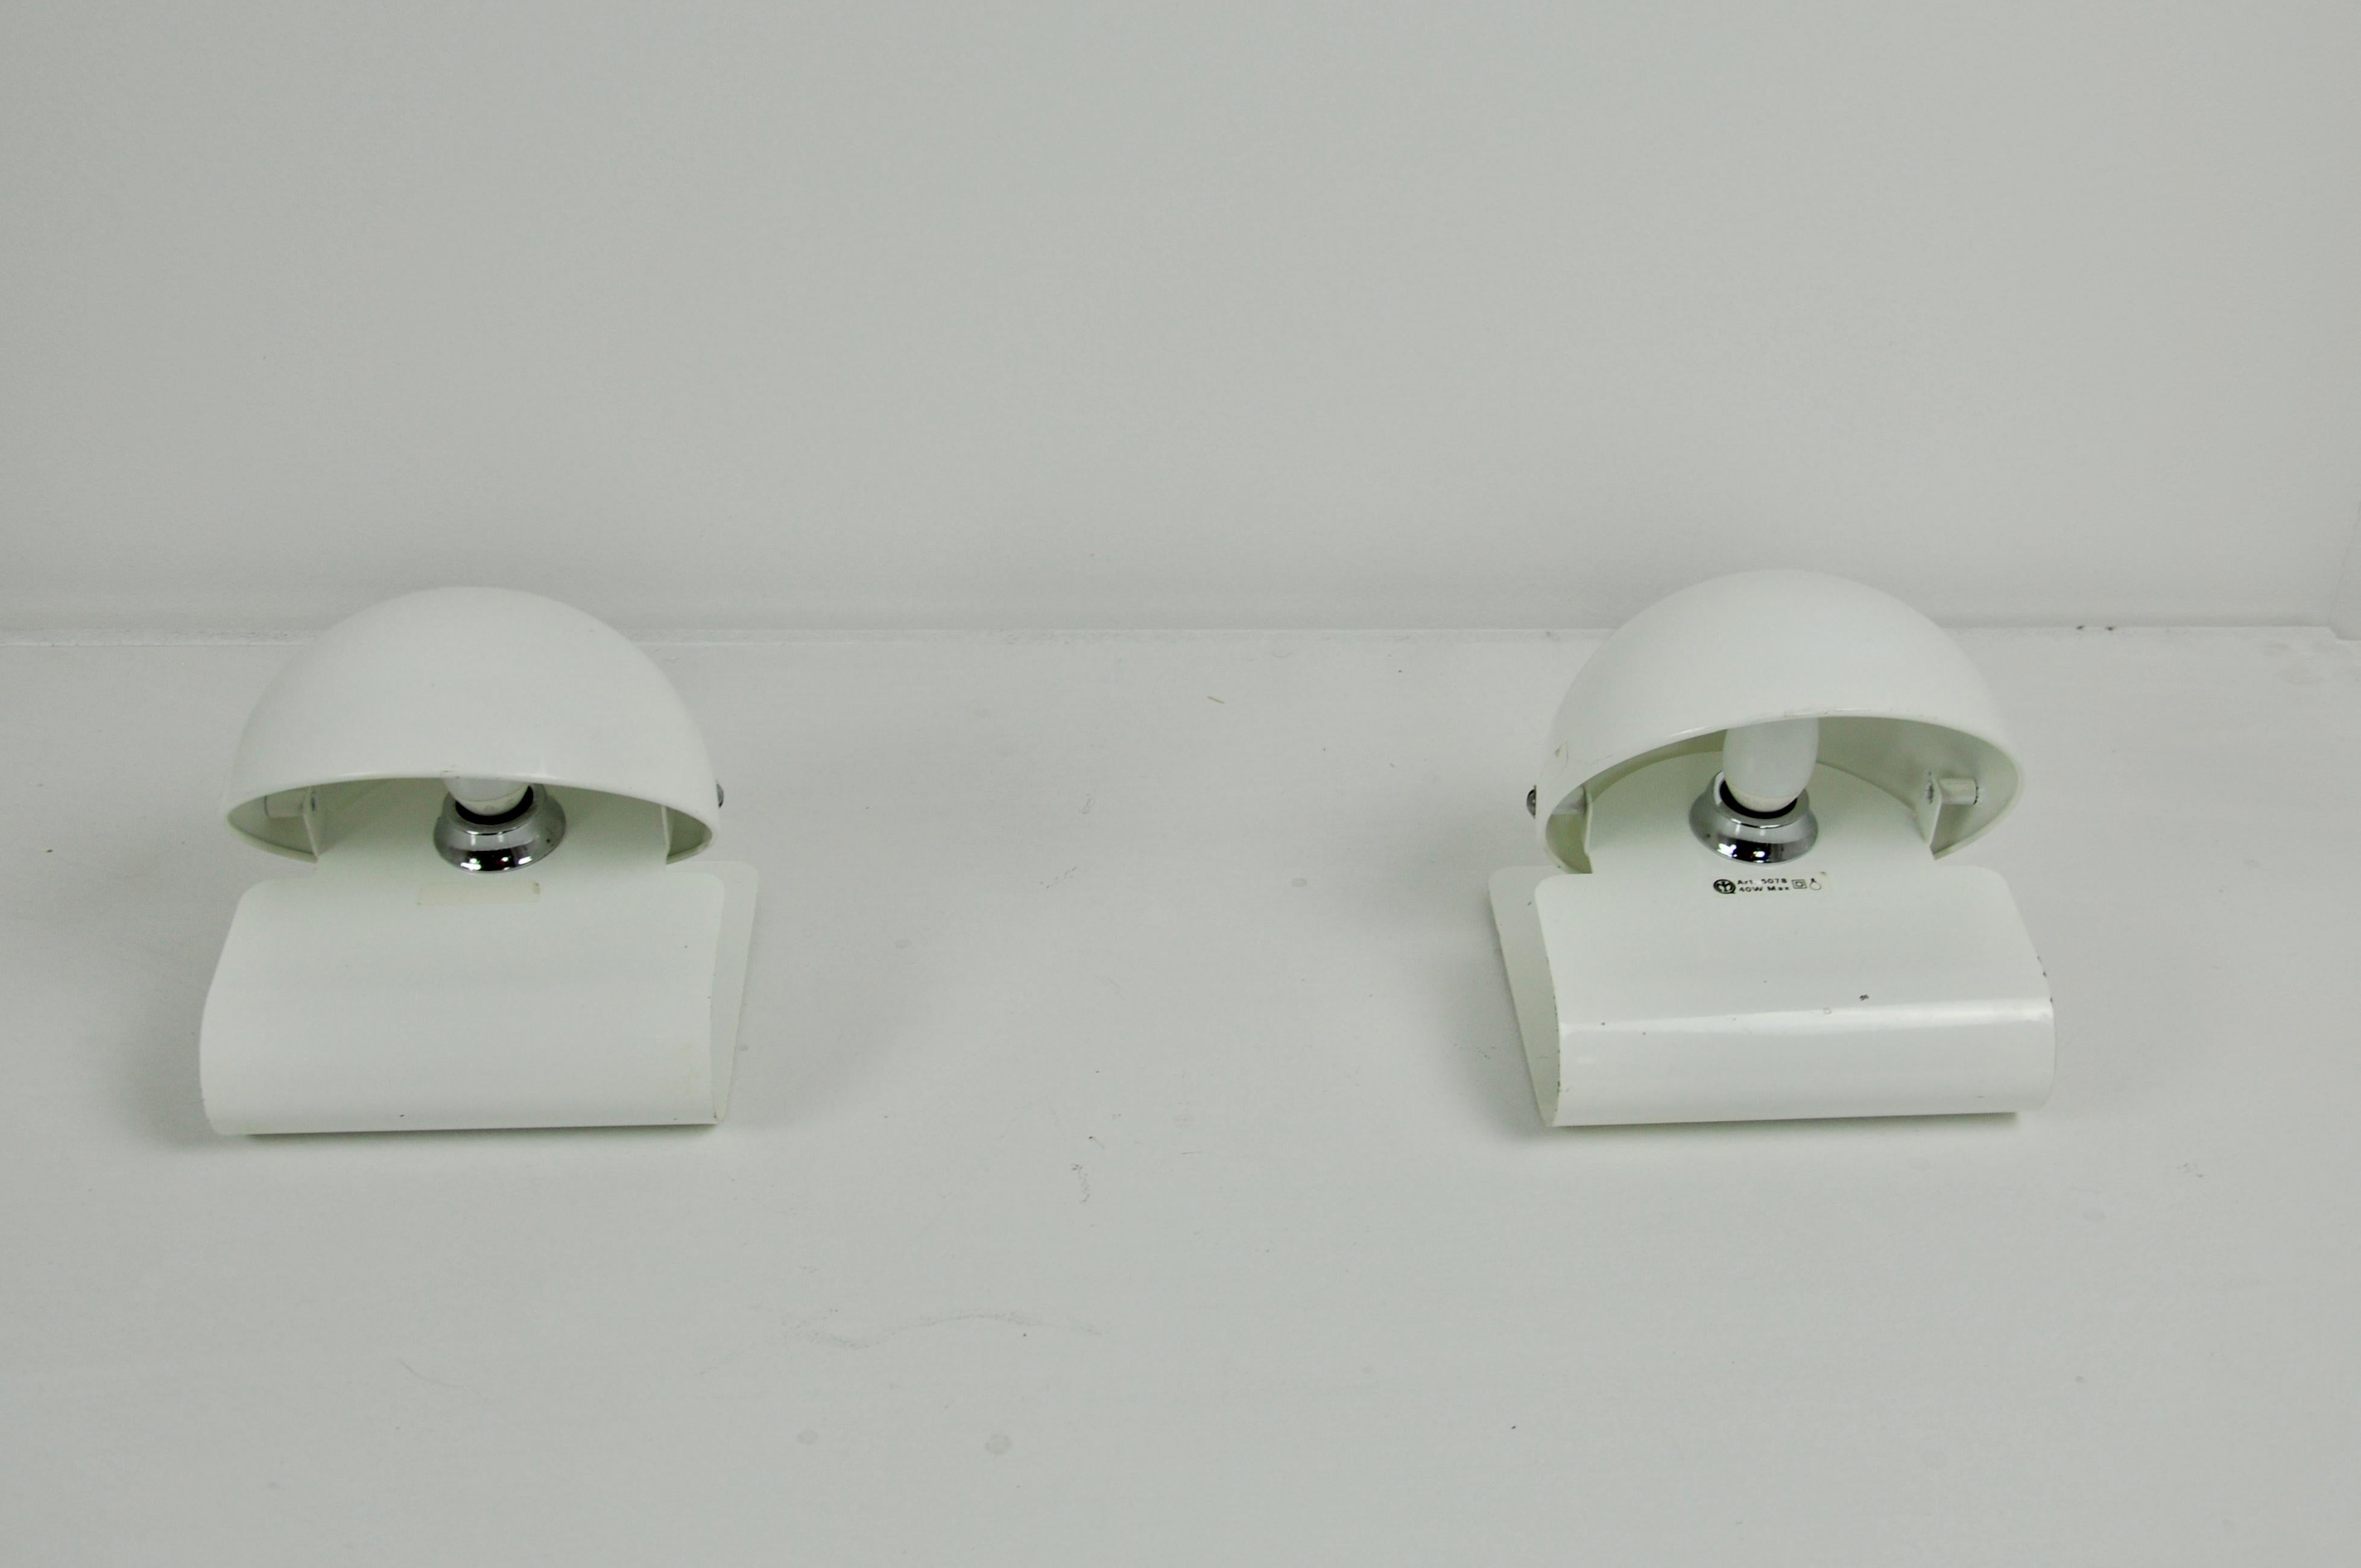 Pair of metal lamp in white color. Slight wear due to time and the age of the object.